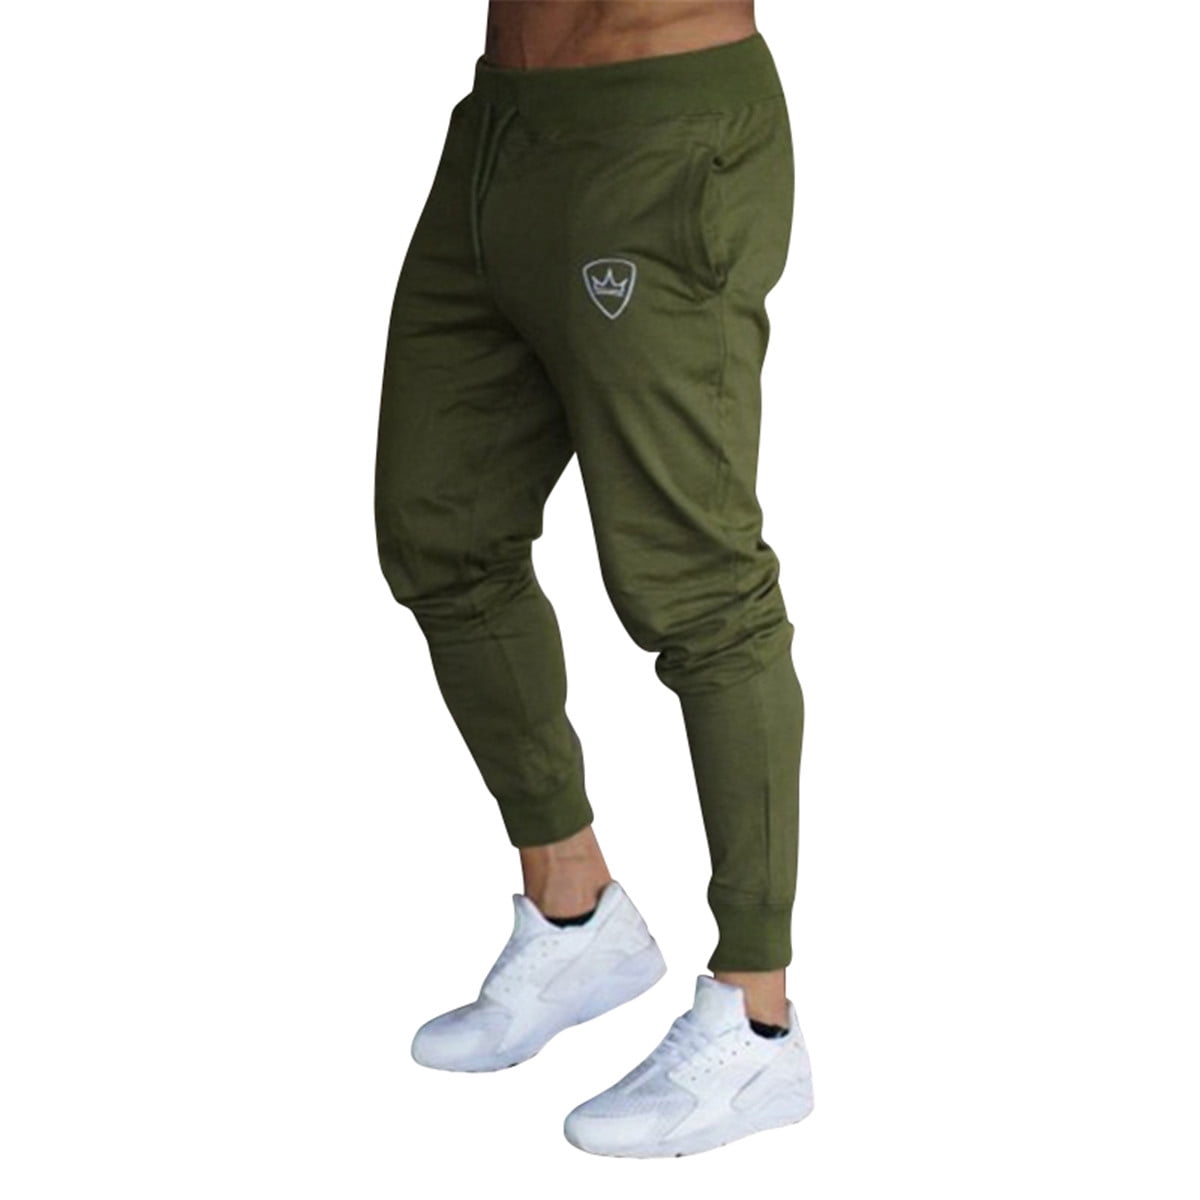 XXR Deluxe Fleece Joggers Tracksuit Bottom Gym Jogging Exercise Clothing MMA Fit 